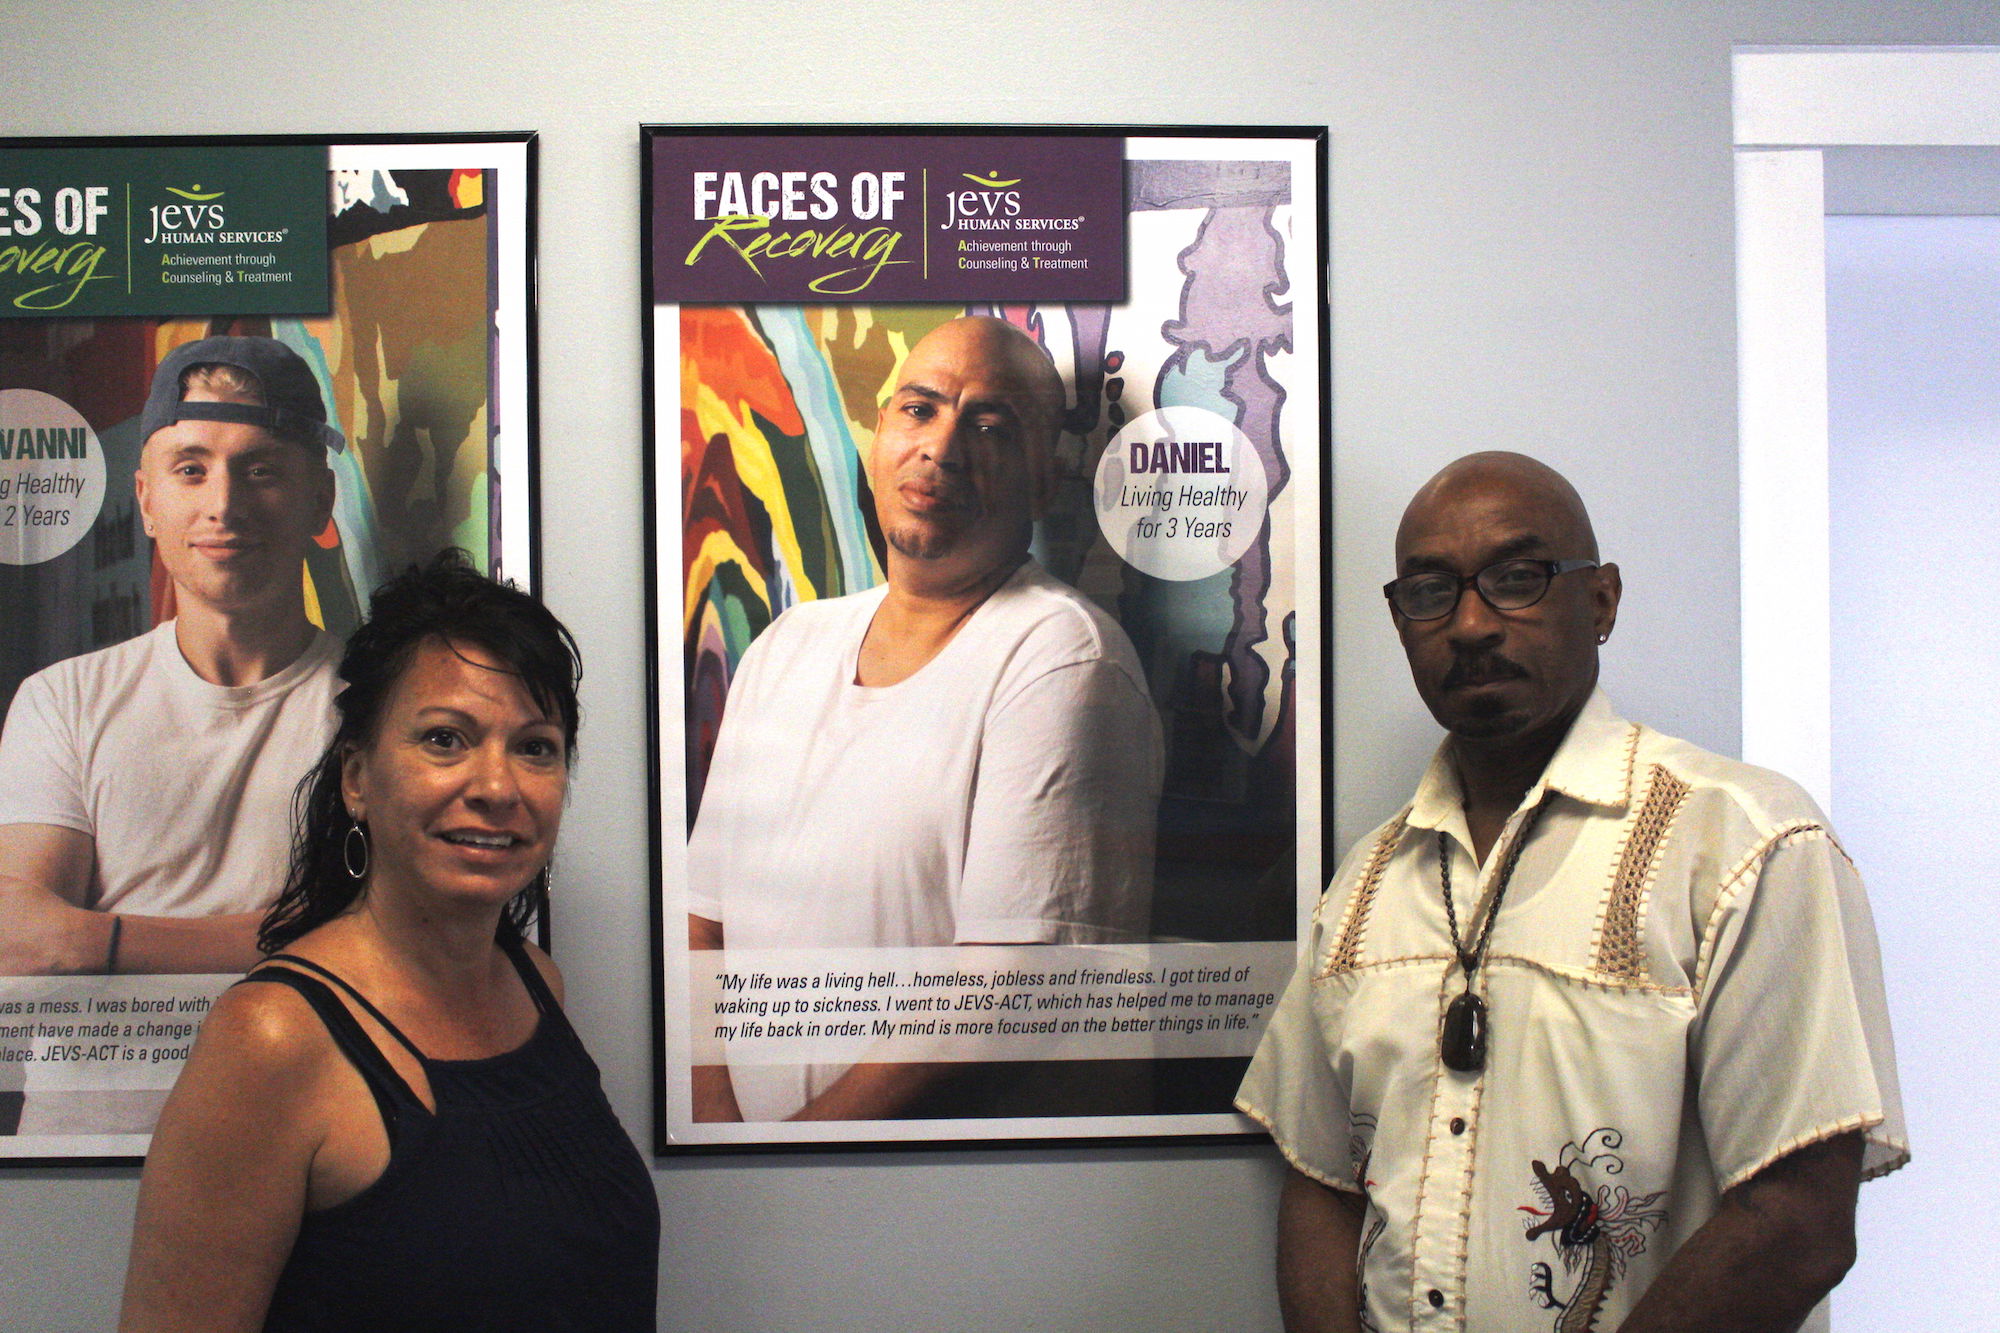 Maria Delgado and Sam Cole pose with a picture of Daniel Gonzalez. They are two of the key staff members for JEVS' new job training program for recovering addicts. Photo: Nigel Thompson/AL DÍA News.